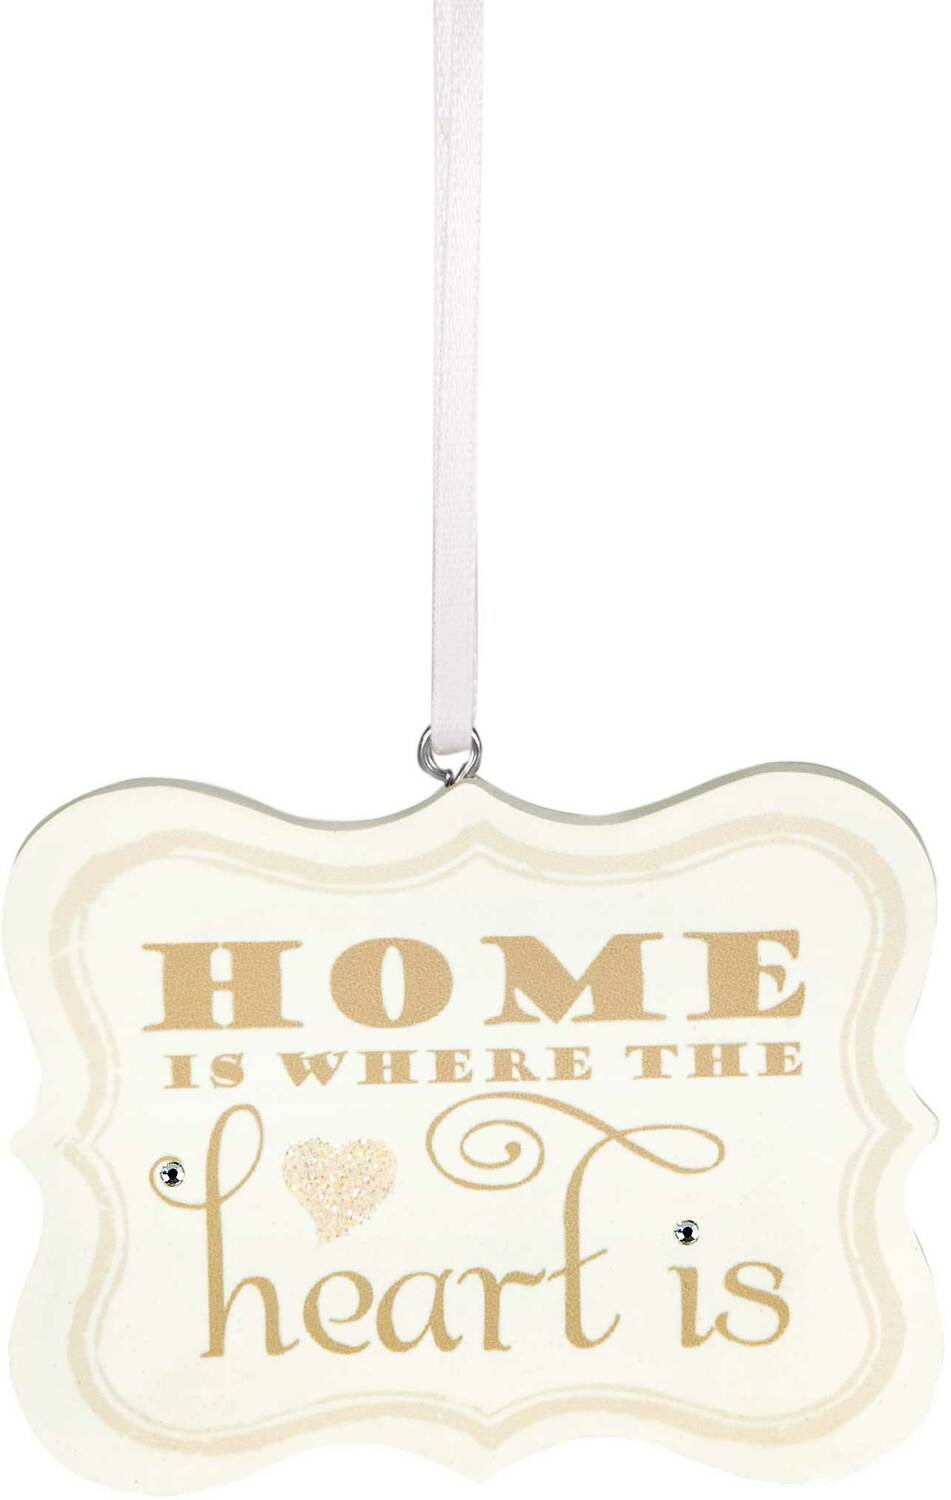 Home is Where the Heart is by Signs of Happiness - Home is Where the Heart is - 2.75" x 2.25" Hanging Plaque